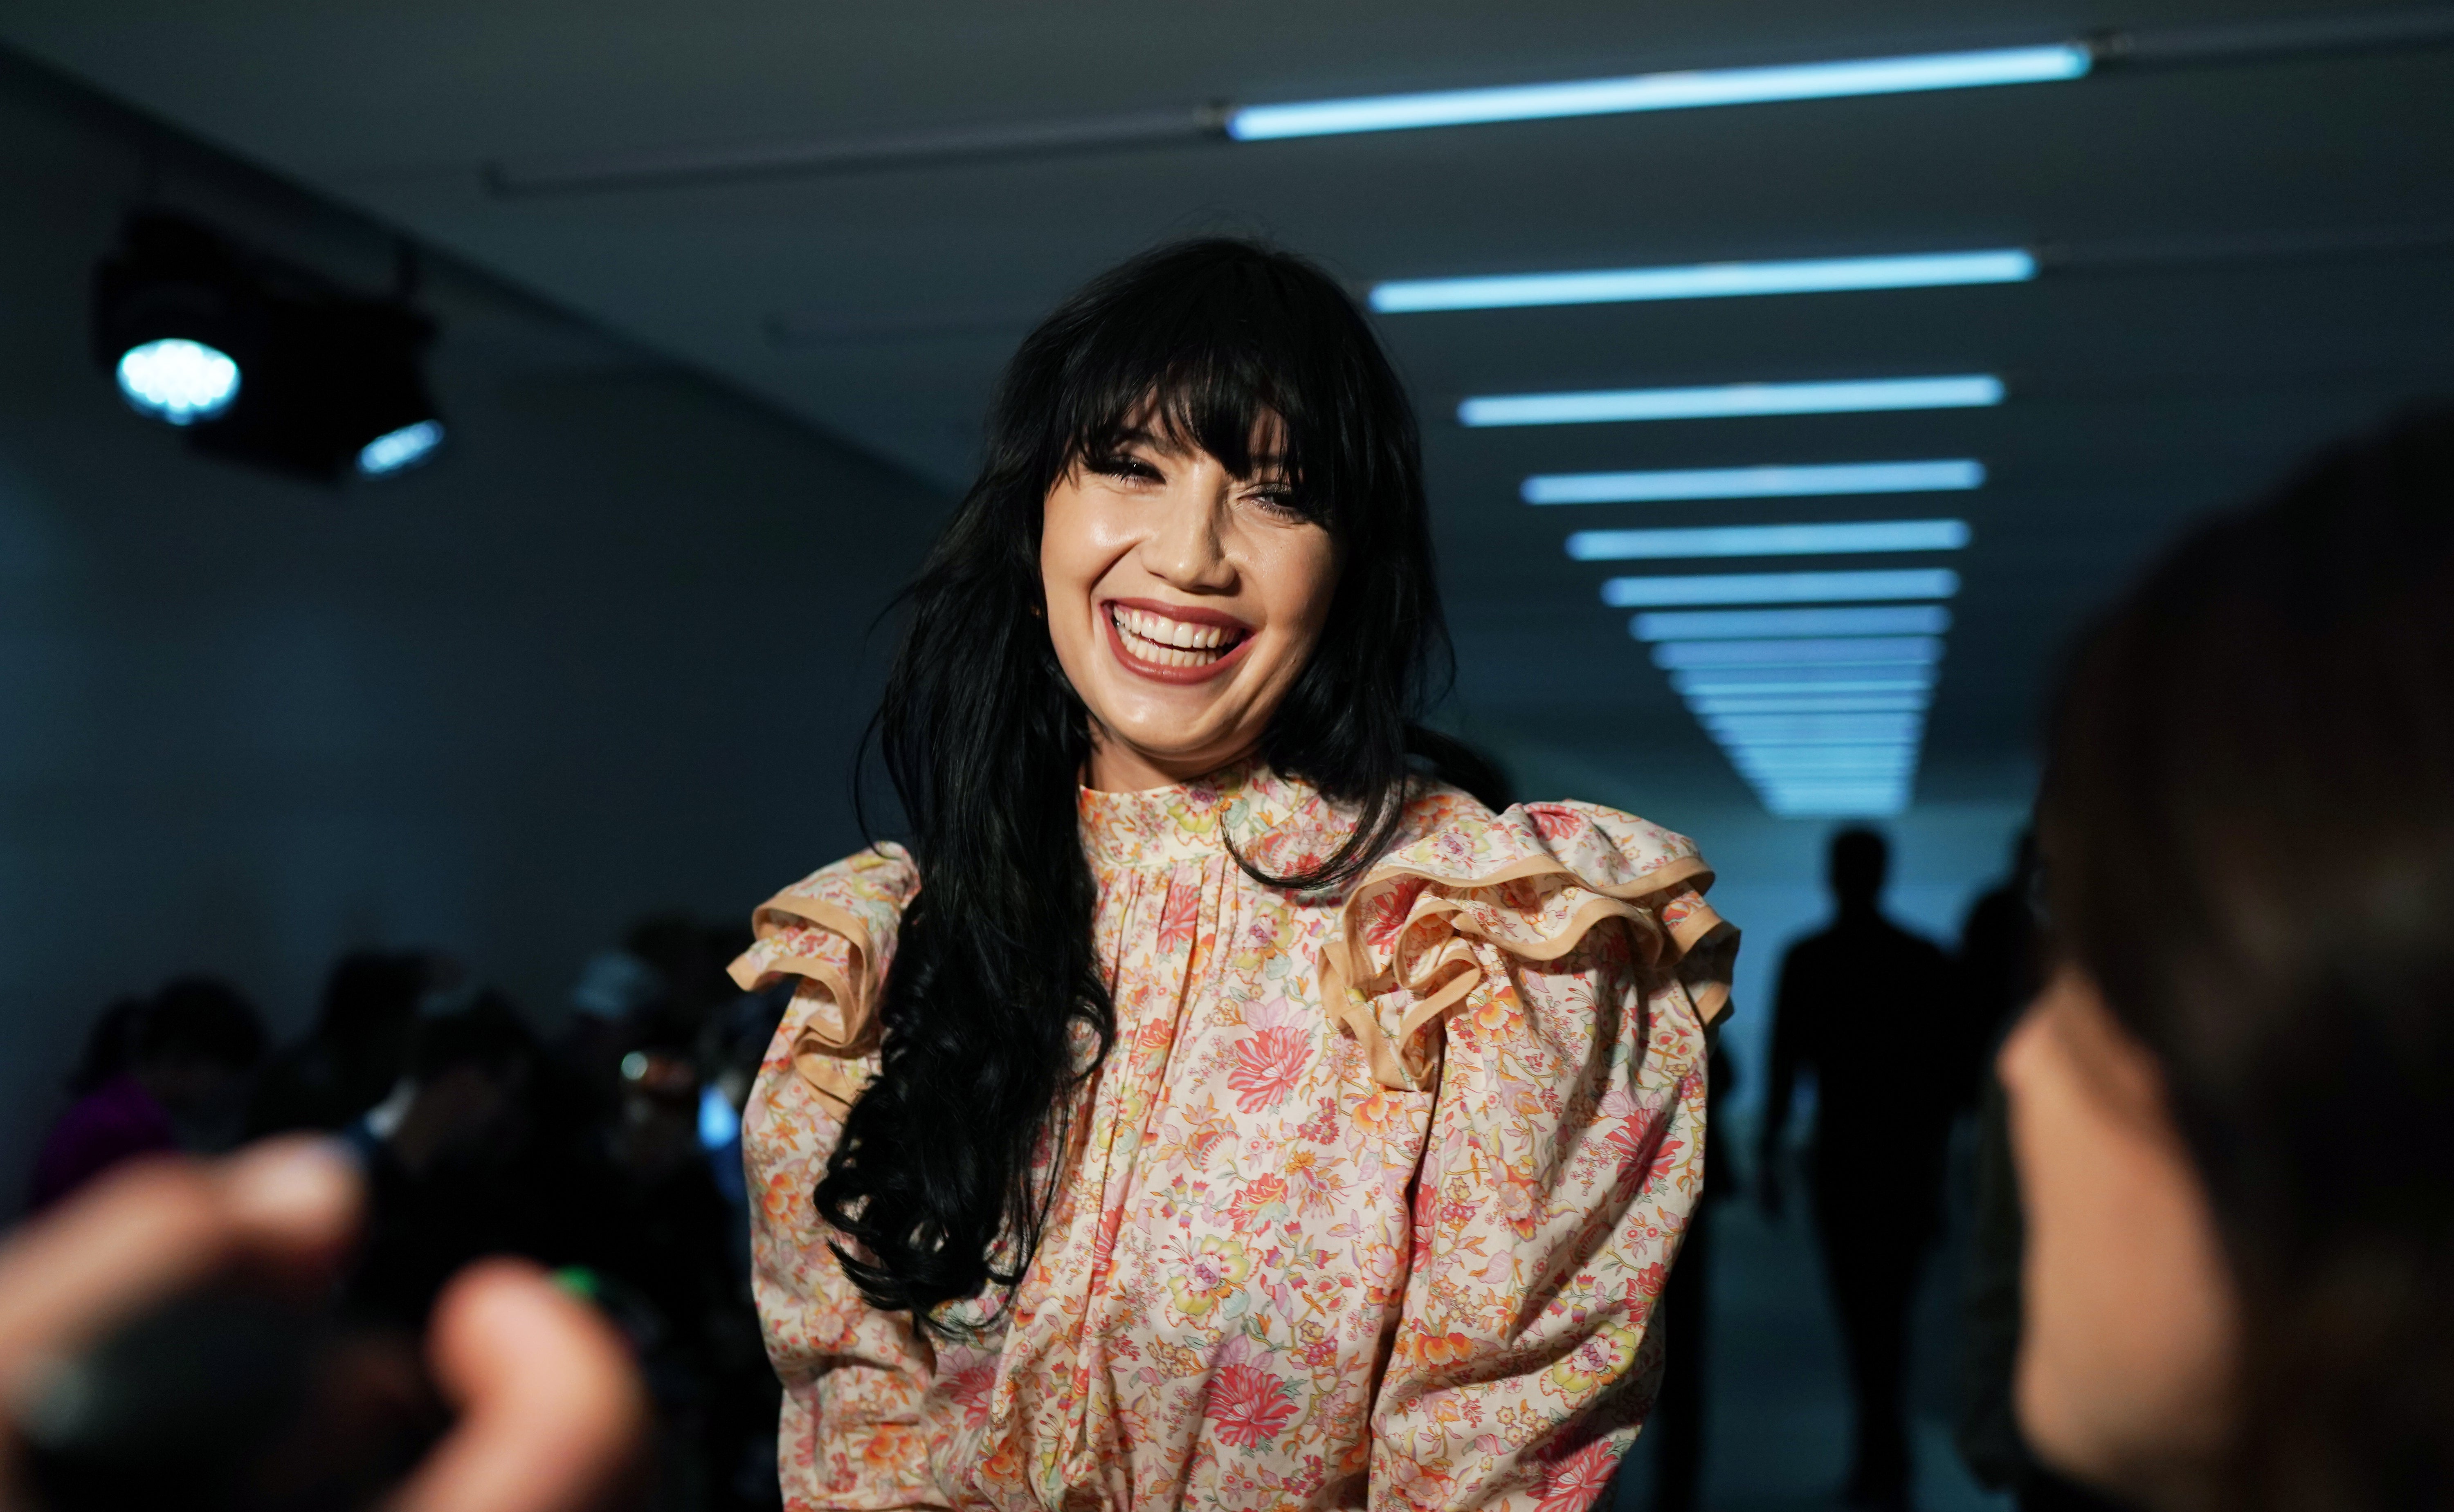 Daisy Lowe at the front row ahead of the Matty Bovan Spring/Summer 2020 London Fashion Week at the BFC Showspace in London.